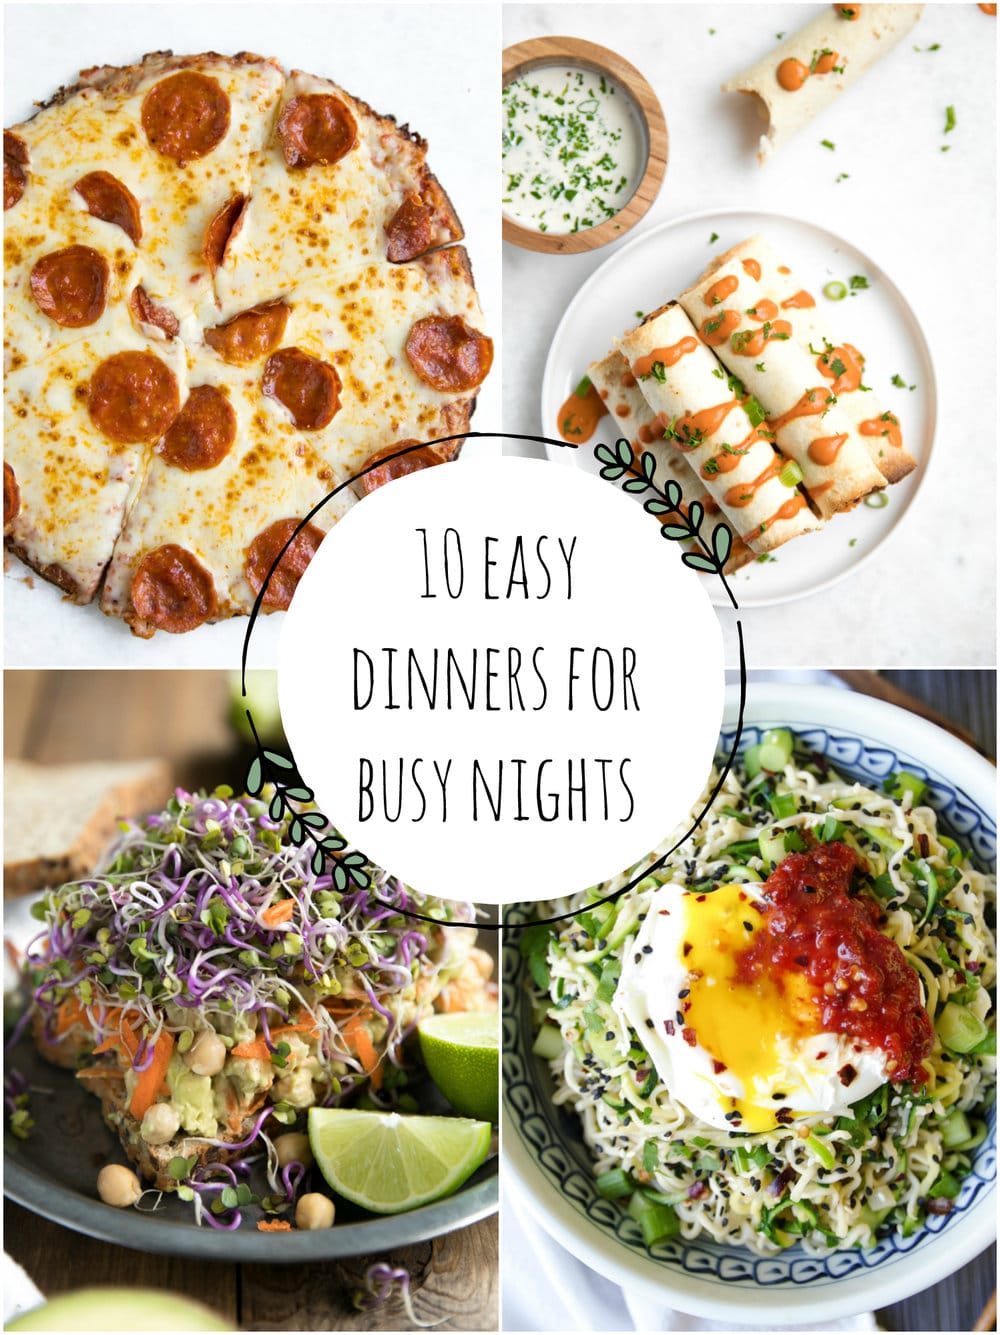 10 Easy Dinners for Busy Nights